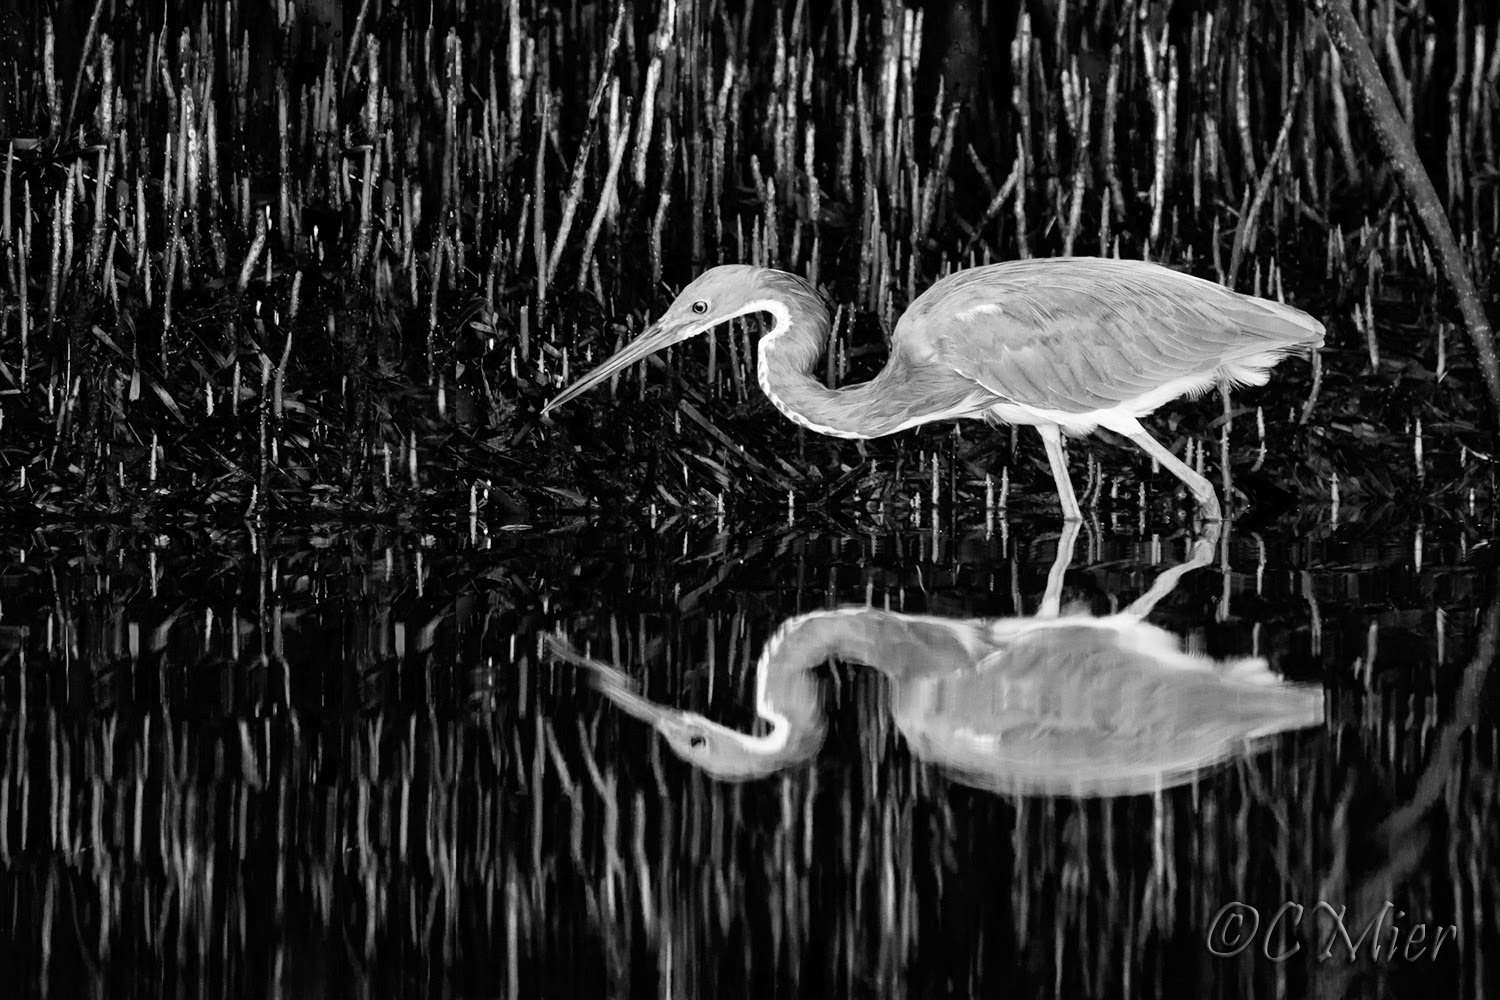 Florida Photography from a Canoe: Birds in Black and White